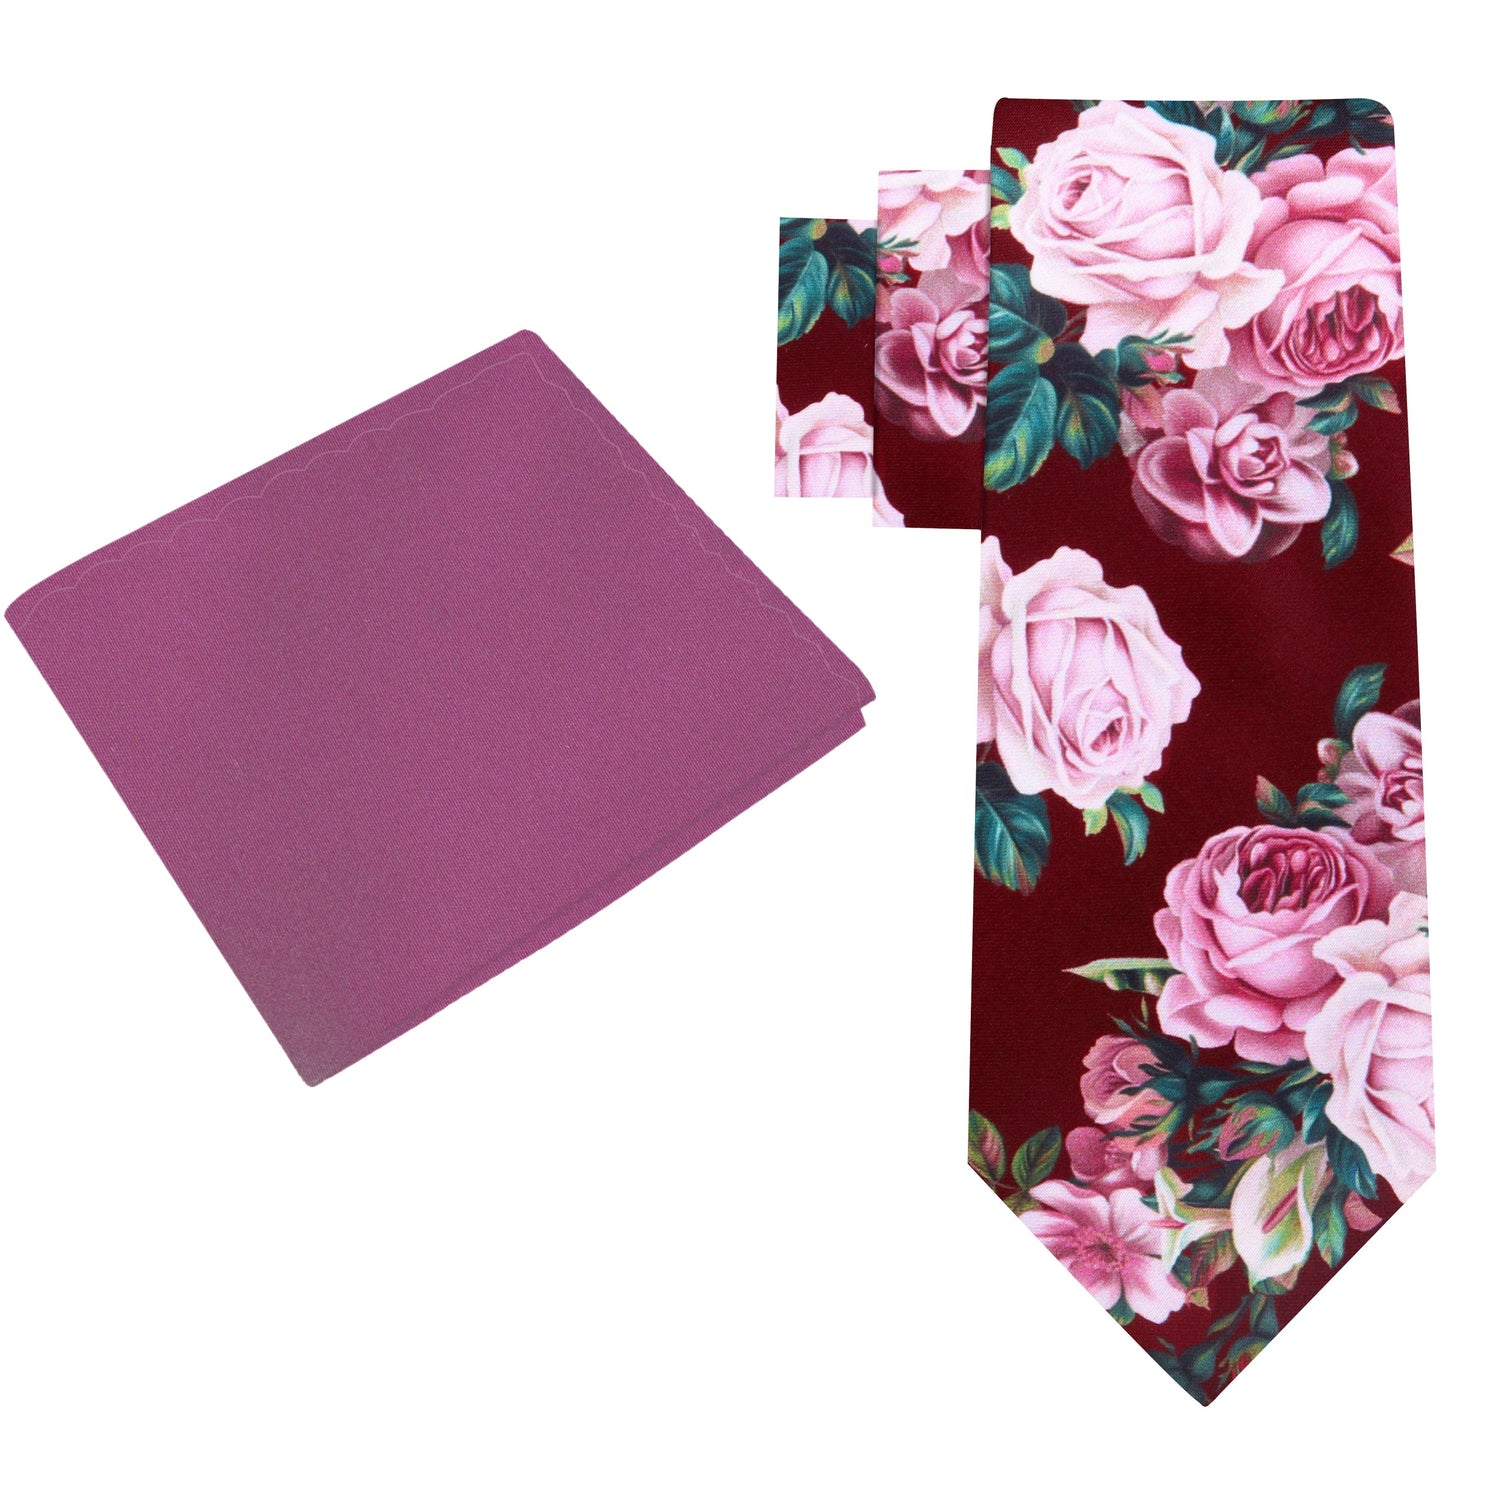 Alt View: Deep Red Wine Vase of Flowers Tie and Accenting PocketSquare12